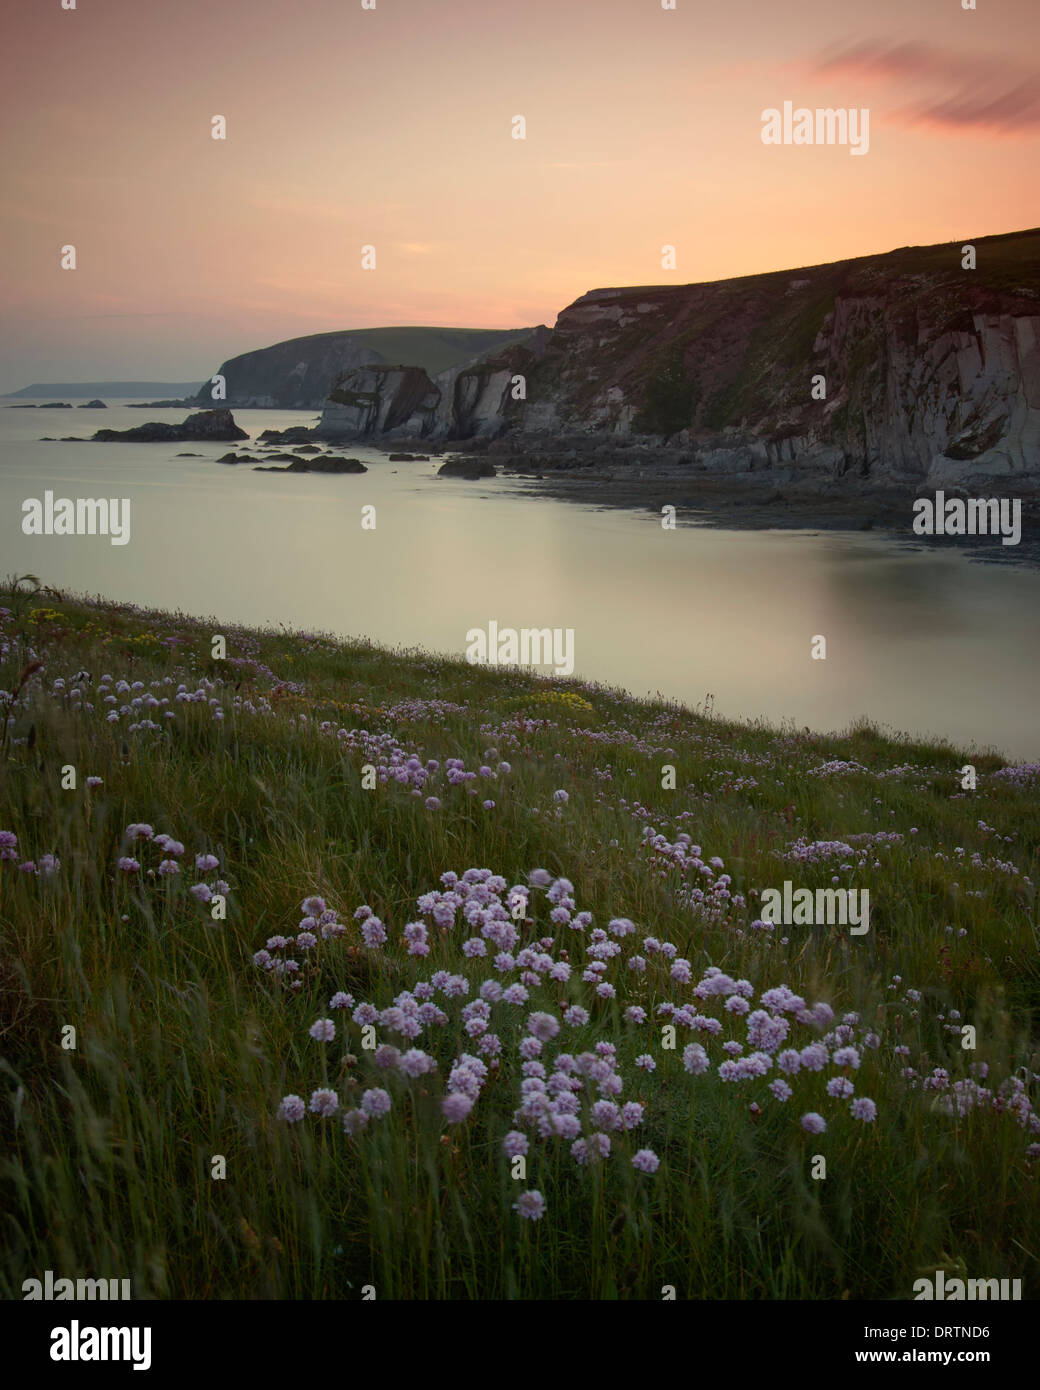 Thrift near Ayrmer Cove on the South West Coast Path at Kingsbridge overlooking Westcombe Beach, Ringmoor just after sunset Stock Photo